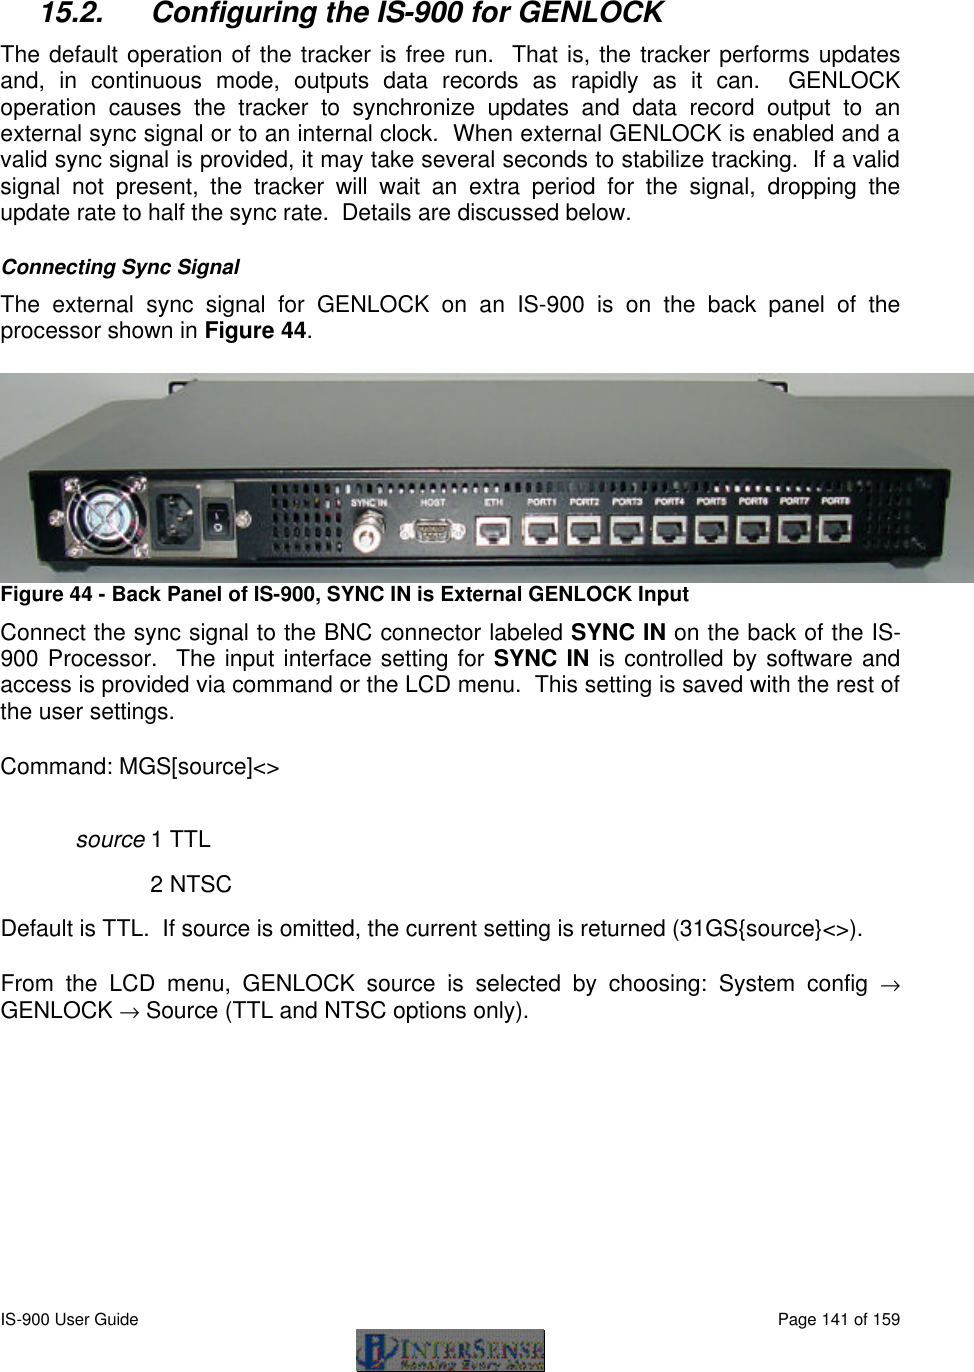  IS-900 User Guide                                                                                                                                          Page 141 of 159   15.2. Configuring the IS-900 for GENLOCK The default operation of the tracker is free run.  That is, the tracker performs updates and, in continuous mode, outputs data records as rapidly as it can.  GENLOCK operation causes the tracker to synchronize updates and data record output to an external sync signal or to an internal clock.  When external GENLOCK is enabled and a valid sync signal is provided, it may take several seconds to stabilize tracking.  If a valid signal not present, the tracker will wait an extra period for the signal, dropping the update rate to half the sync rate.  Details are discussed below. Connecting Sync Signal The external sync signal for GENLOCK on an IS-900 is on the back panel of the processor shown in Figure 44.  Figure 44 - Back Panel of IS-900, SYNC IN is External GENLOCK Input Connect the sync signal to the BNC connector labeled SYNC IN on the back of the IS-900 Processor.  The input interface setting for SYNC IN is controlled by software and access is provided via command or the LCD menu.  This setting is saved with the rest of the user settings. Command: MGS[source]&lt;&gt; source 1 TTL    2 NTSC Default is TTL.  If source is omitted, the current setting is returned (31GS{source}&lt;&gt;). From the LCD menu, GENLOCK source is selected by choosing: System config → GENLOCK → Source (TTL and NTSC options only). 